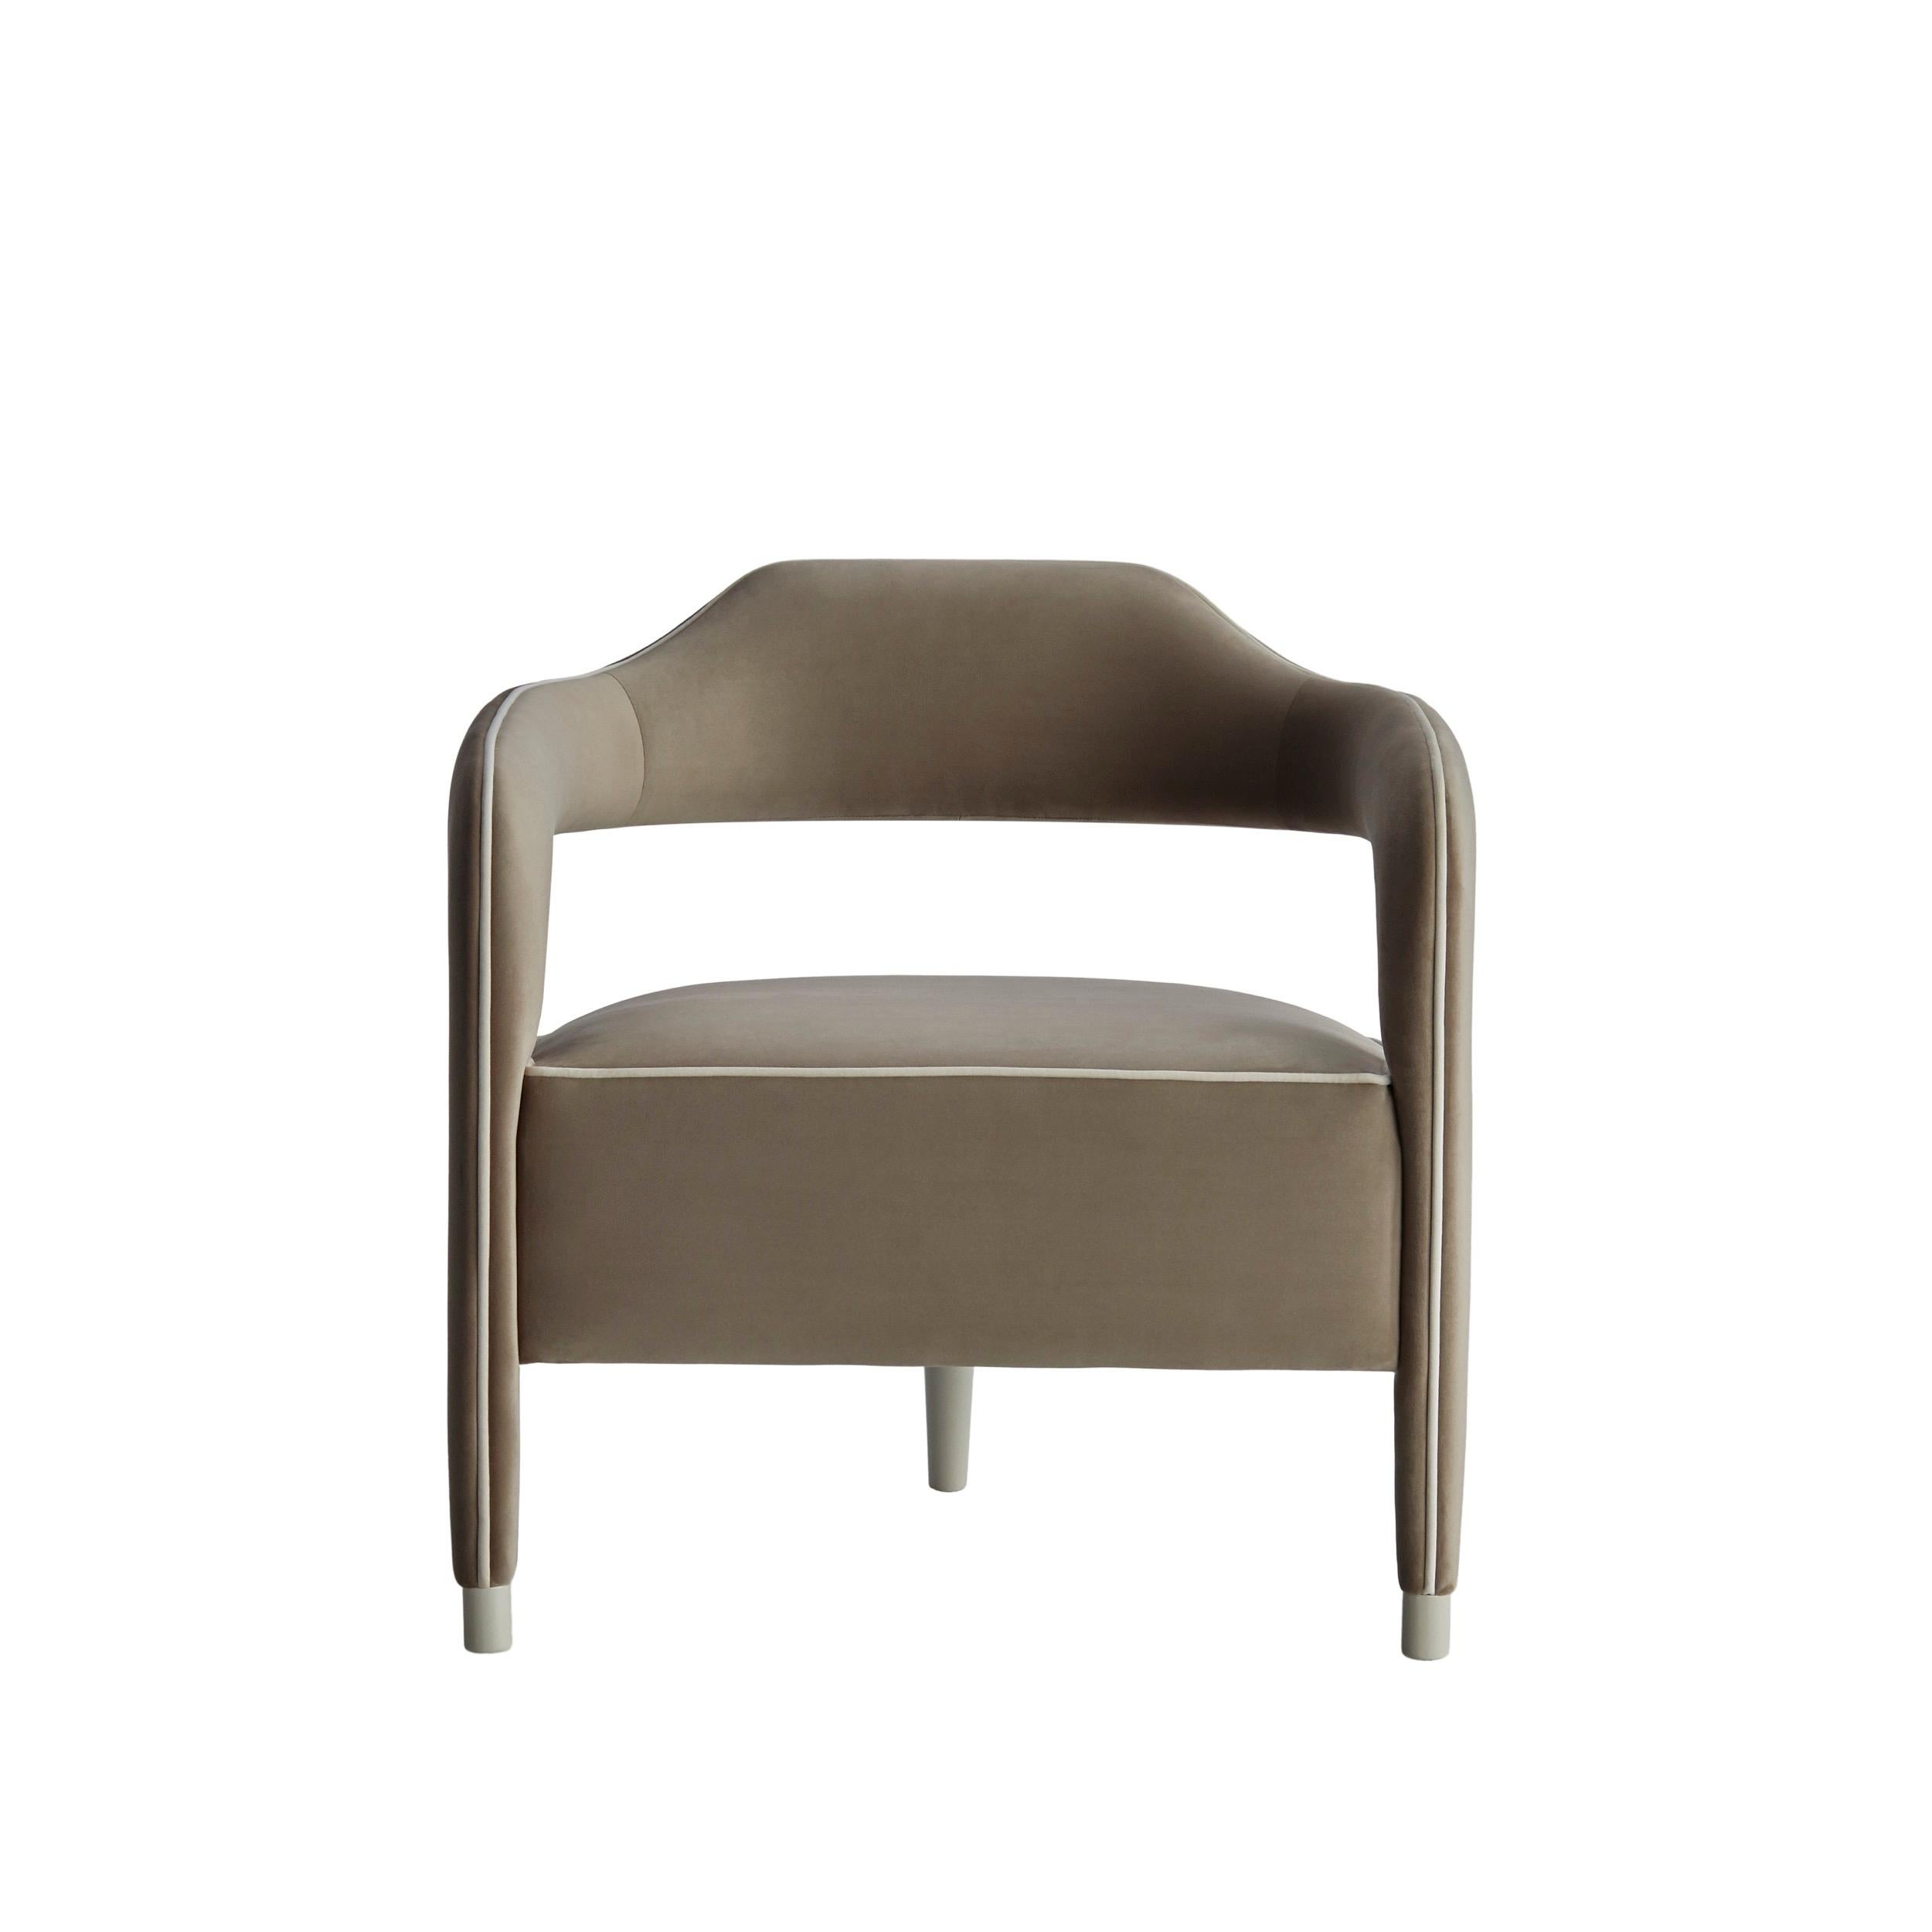 The modern and sophisticated design of INVICTA armchair makes it suitable for any luxury and cosmopolitan interior design inspiration.‎ With just one leg on the back, in solid wood, the Invicta can be upholstered in fabric, eco-leather, natural